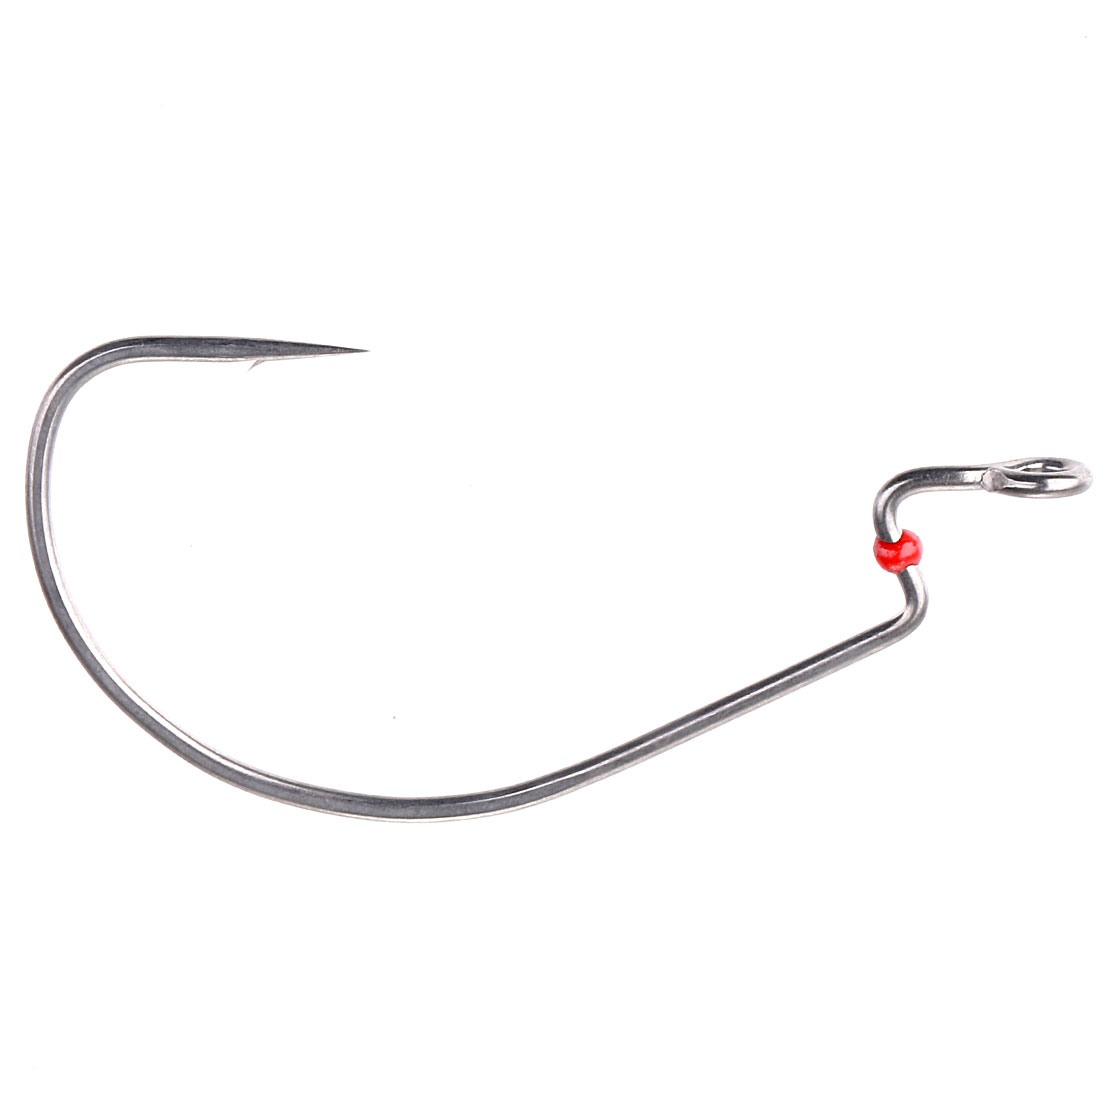 VMC Cheboo Offset Hook with Resin Keeper, Hooks, Accessories, Spin  Fishing